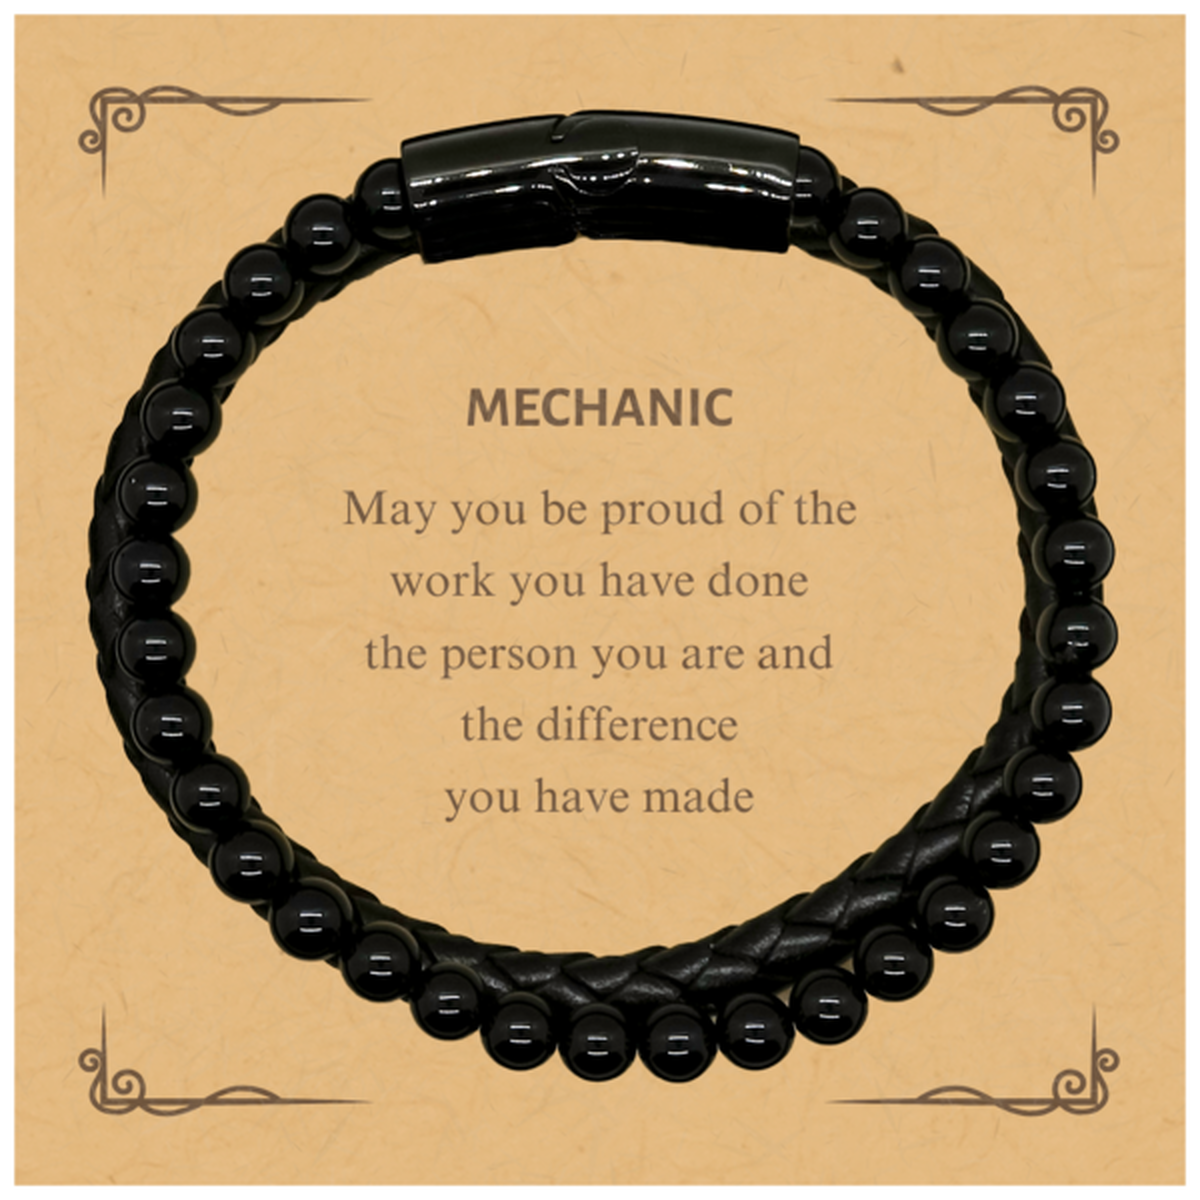 Mechanic May you be proud of the work you have done, Retirement Mechanic Stone Leather Bracelets for Colleague Appreciation Gifts Amazing for Mechanic